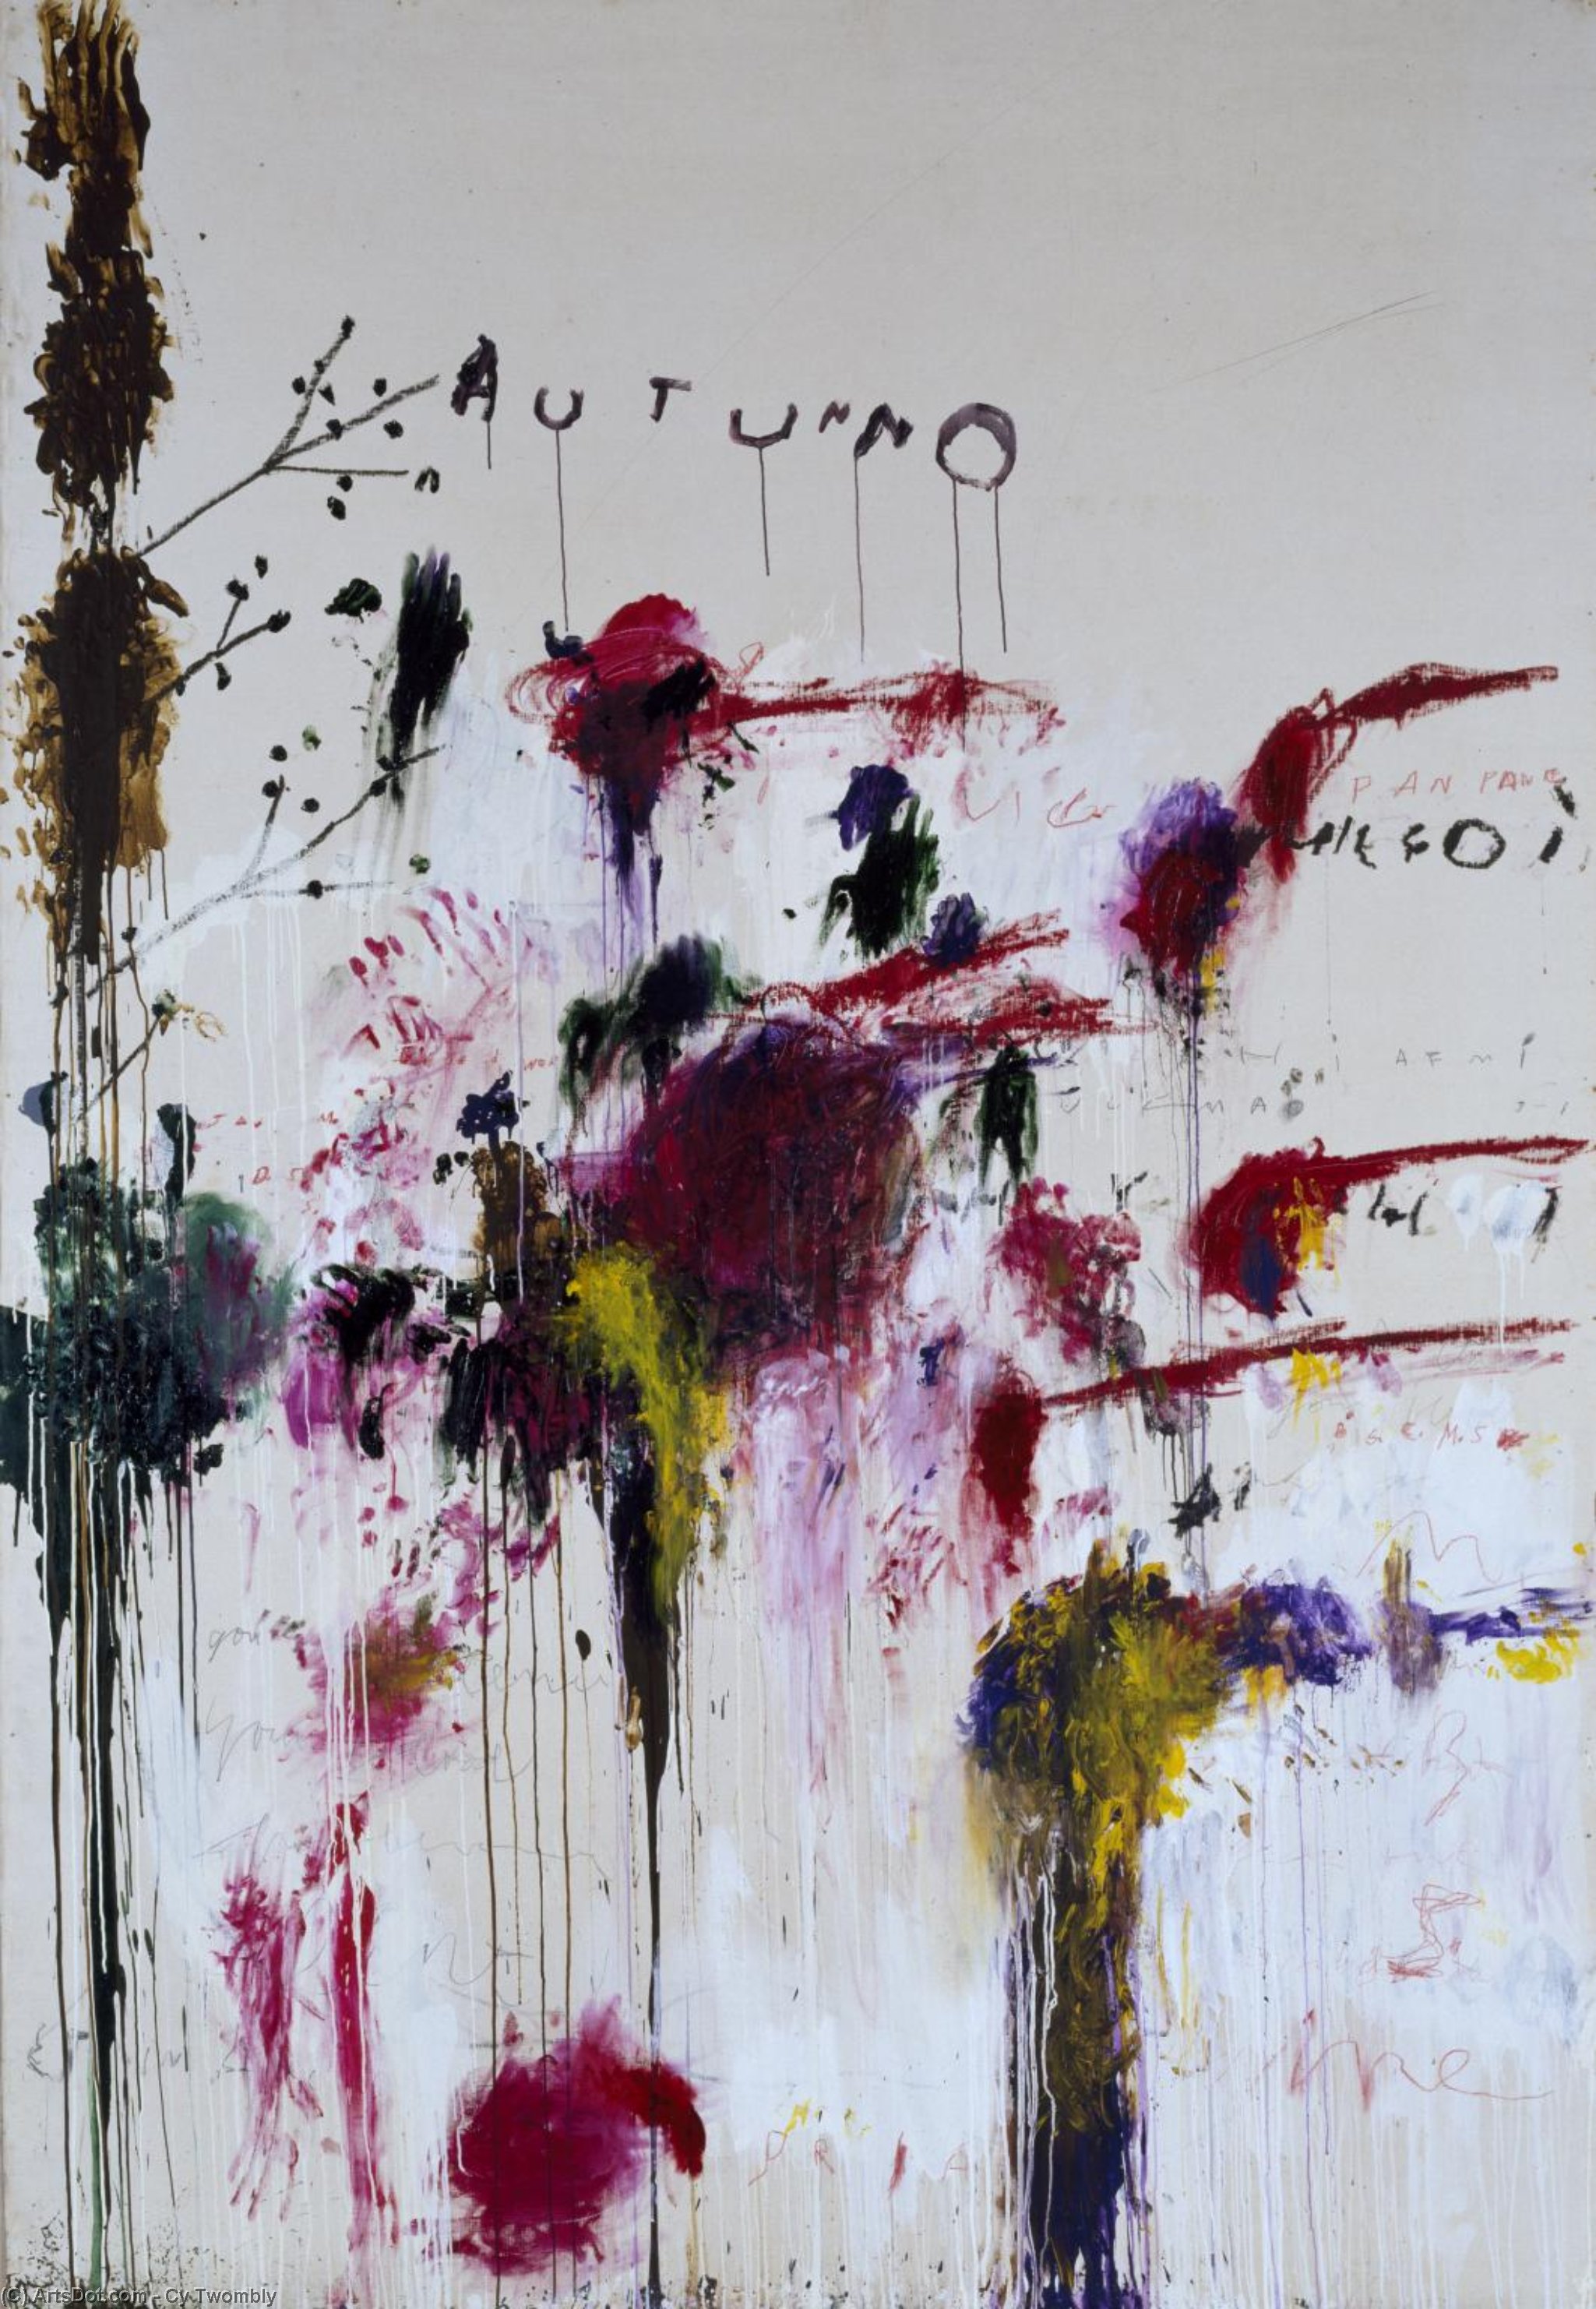 Quattro Stagioni, Autunno, 1995 by Cy Twombly (1928-2011, United States) Cy Twombly | ArtsDot.com